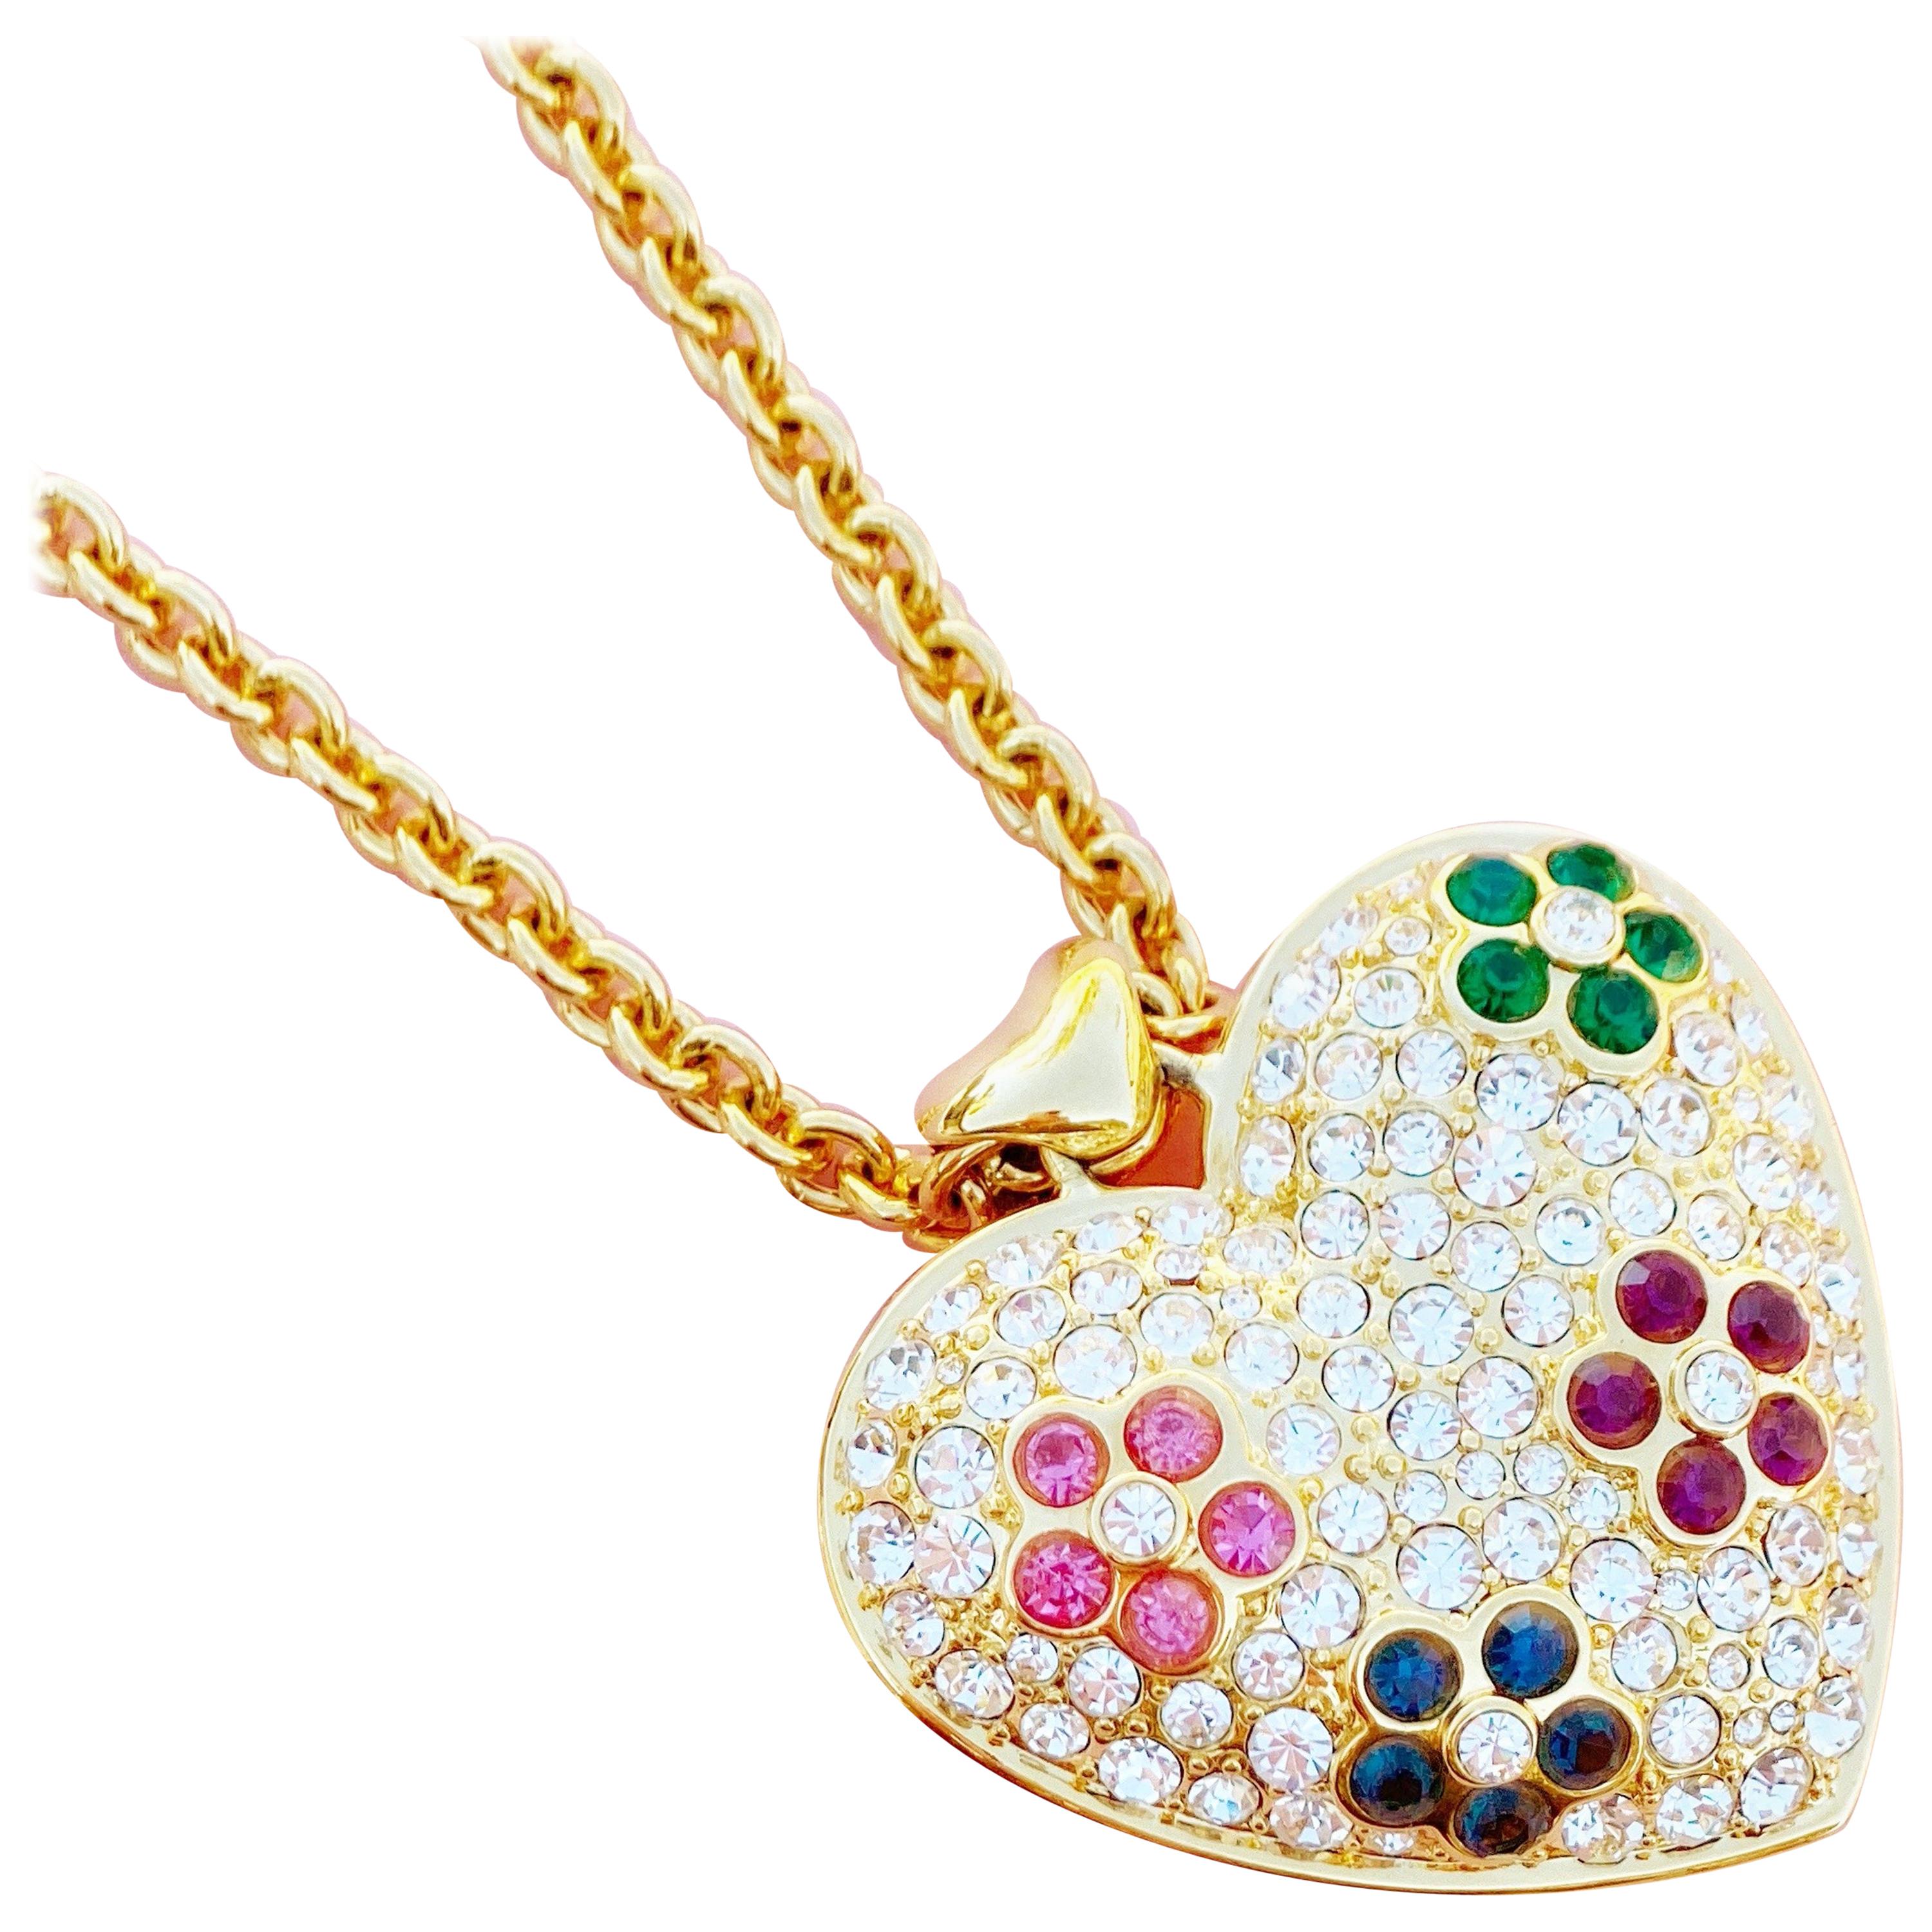 Puffy Rhinestone Heart Pendant Necklace with Floral Motif By Nolan Miller, 1980s